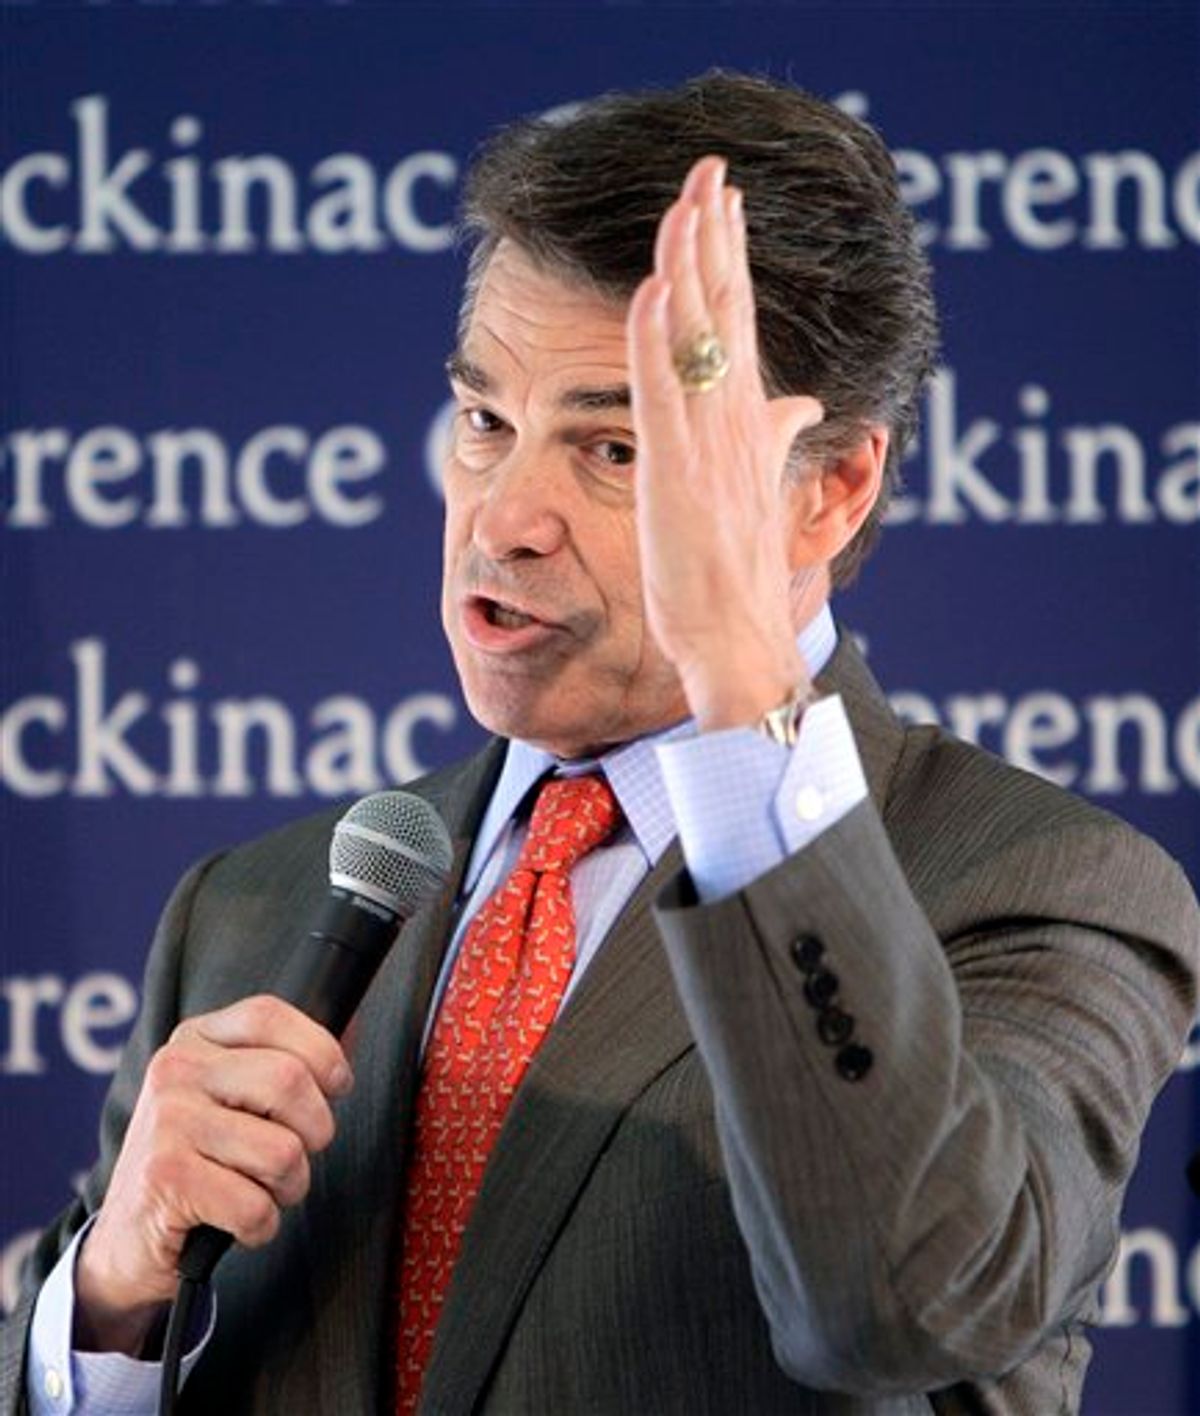 Republican presidential candidate Texas Gov. Rick Perry addresses the Republican Leadership Conference at the Grand Hotel on Mackinac Island, Mich., Saturday, Sept. 24, 2011. (AP Photo/Carlos Osorio)  (AP)